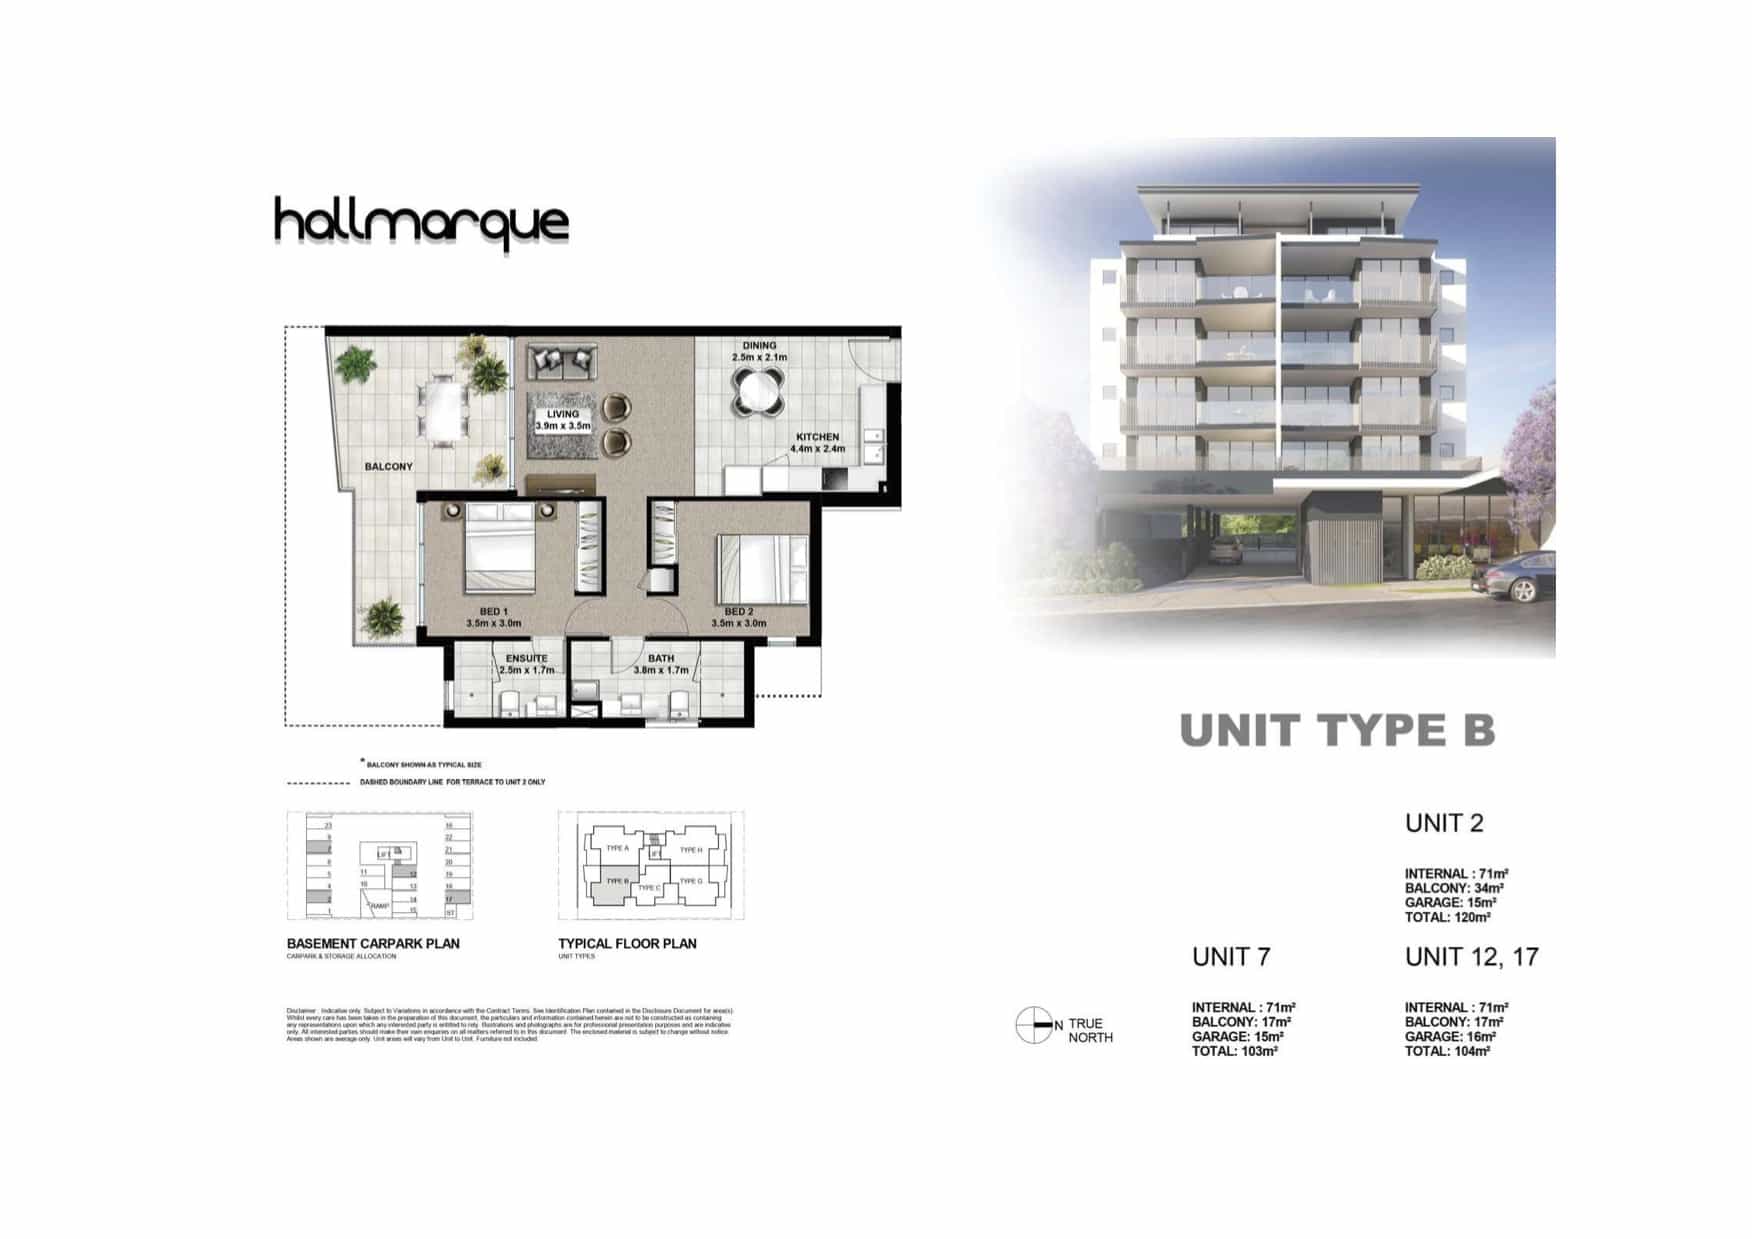 Hallmarque 1 Bedroom Apartment Brisbane with balcony access from bed and living